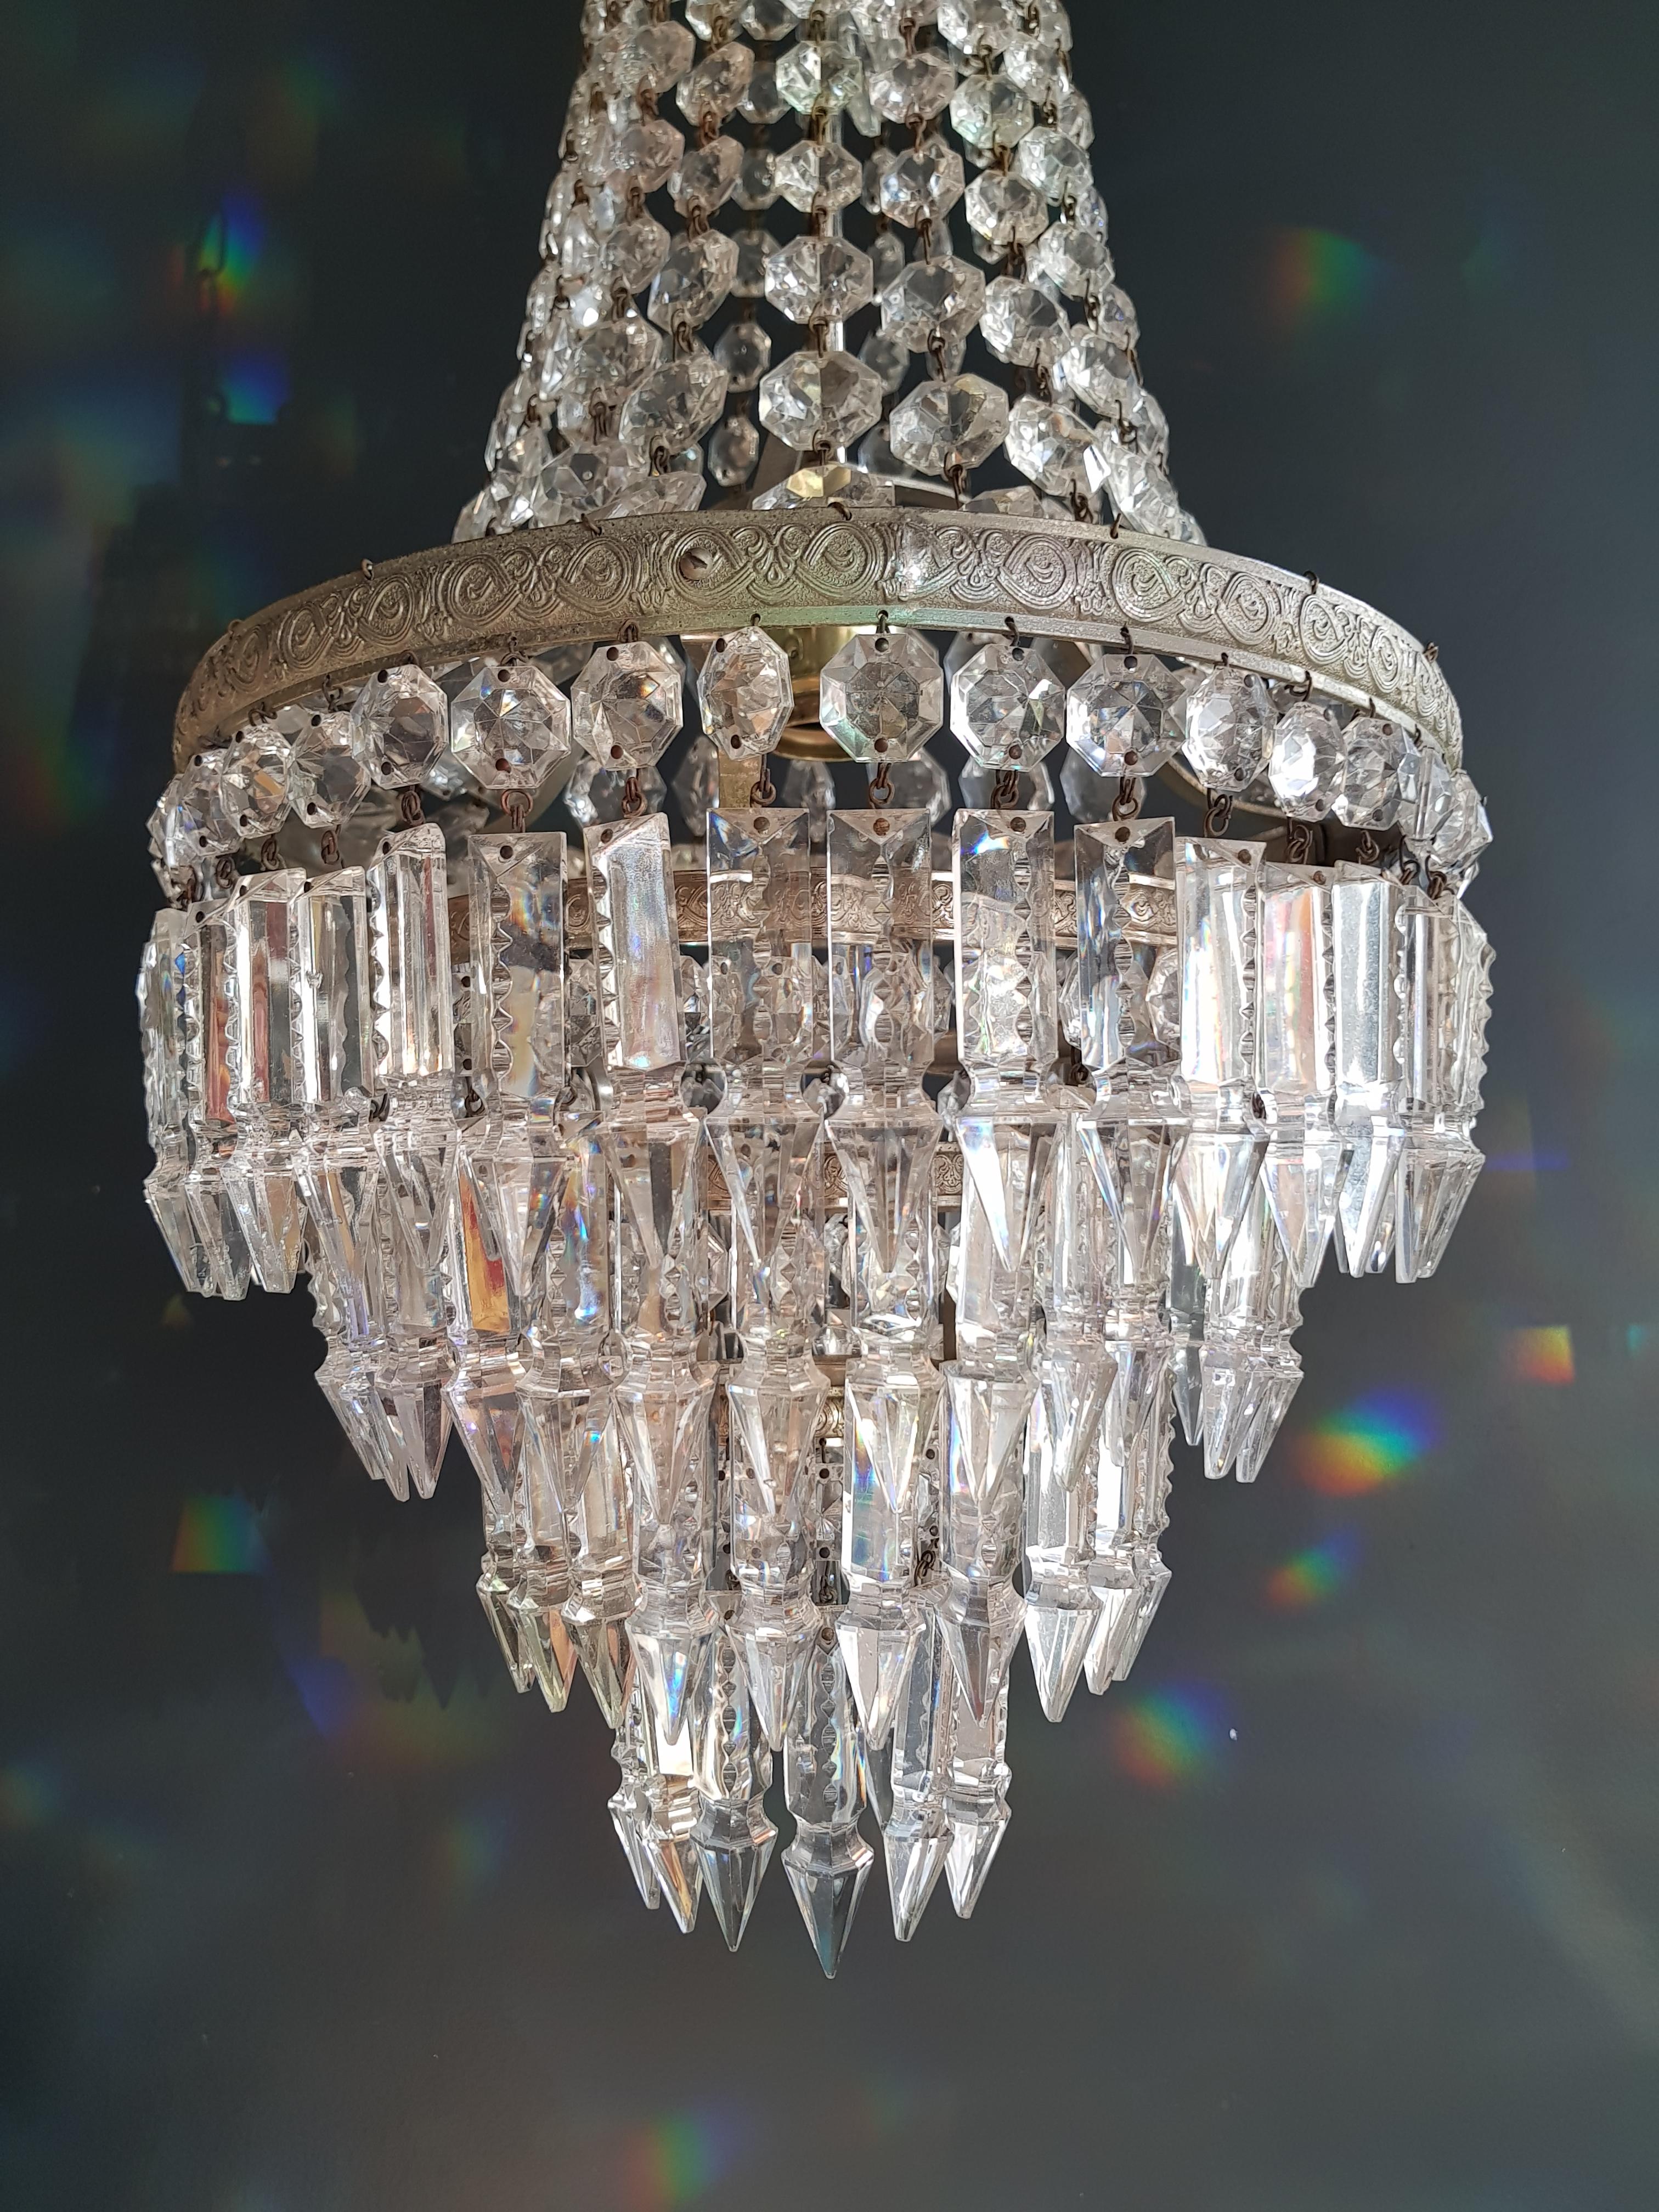 Original preserved chandelier, circa 1950. Cabling and sockets completely renewed. Crystal hand knotted
Measures: Total height: 99 cm, height without chain: 61 cm, diameter 30 cm, weight (approximately) 4kg.

Number of lights: One-light bulb